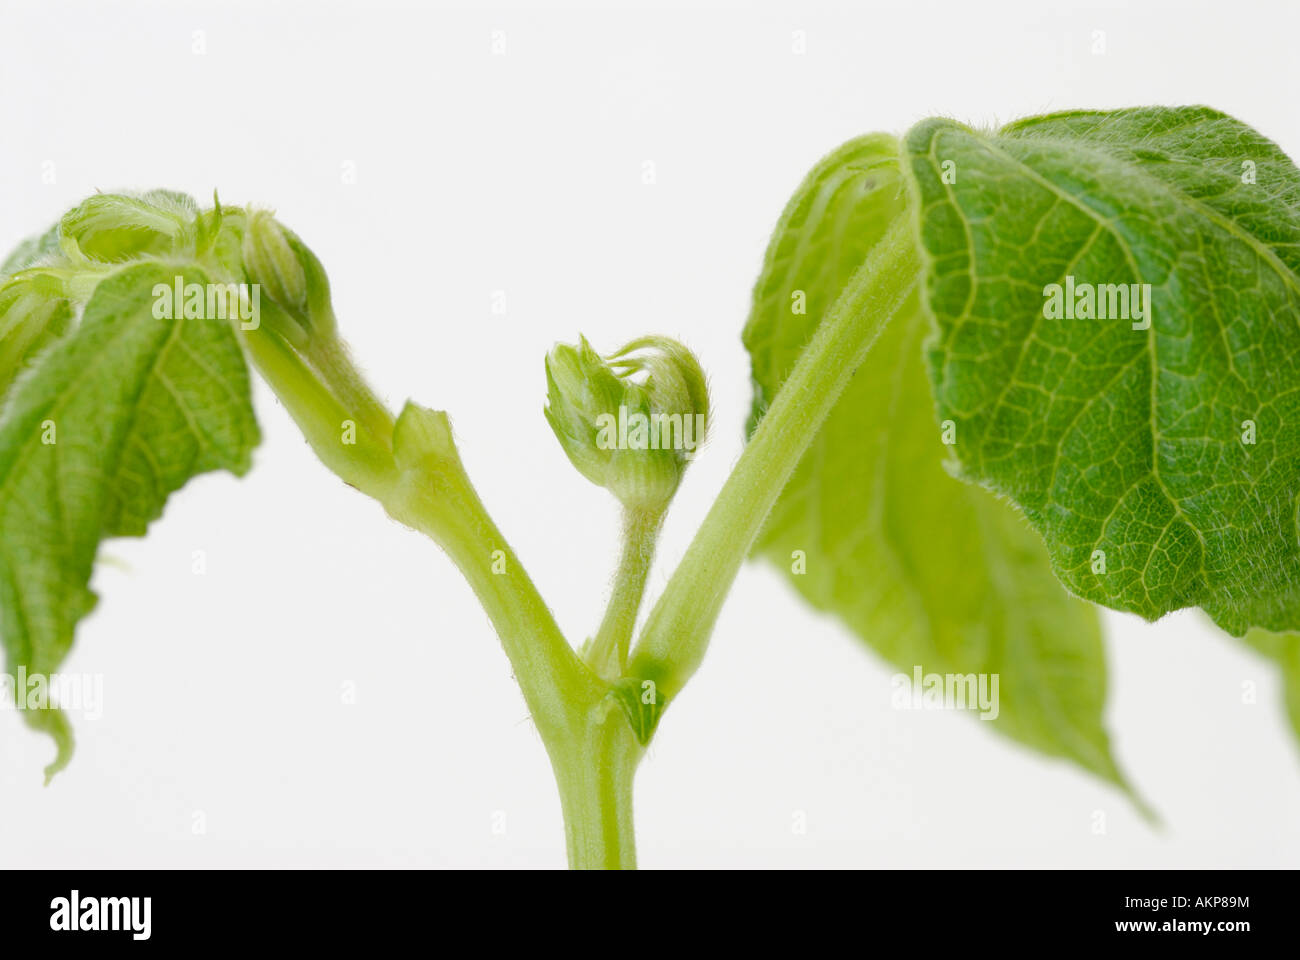 The apical terminal bud and stems of a plant. Apical buds grow out of the apical meristems. Stock Photo